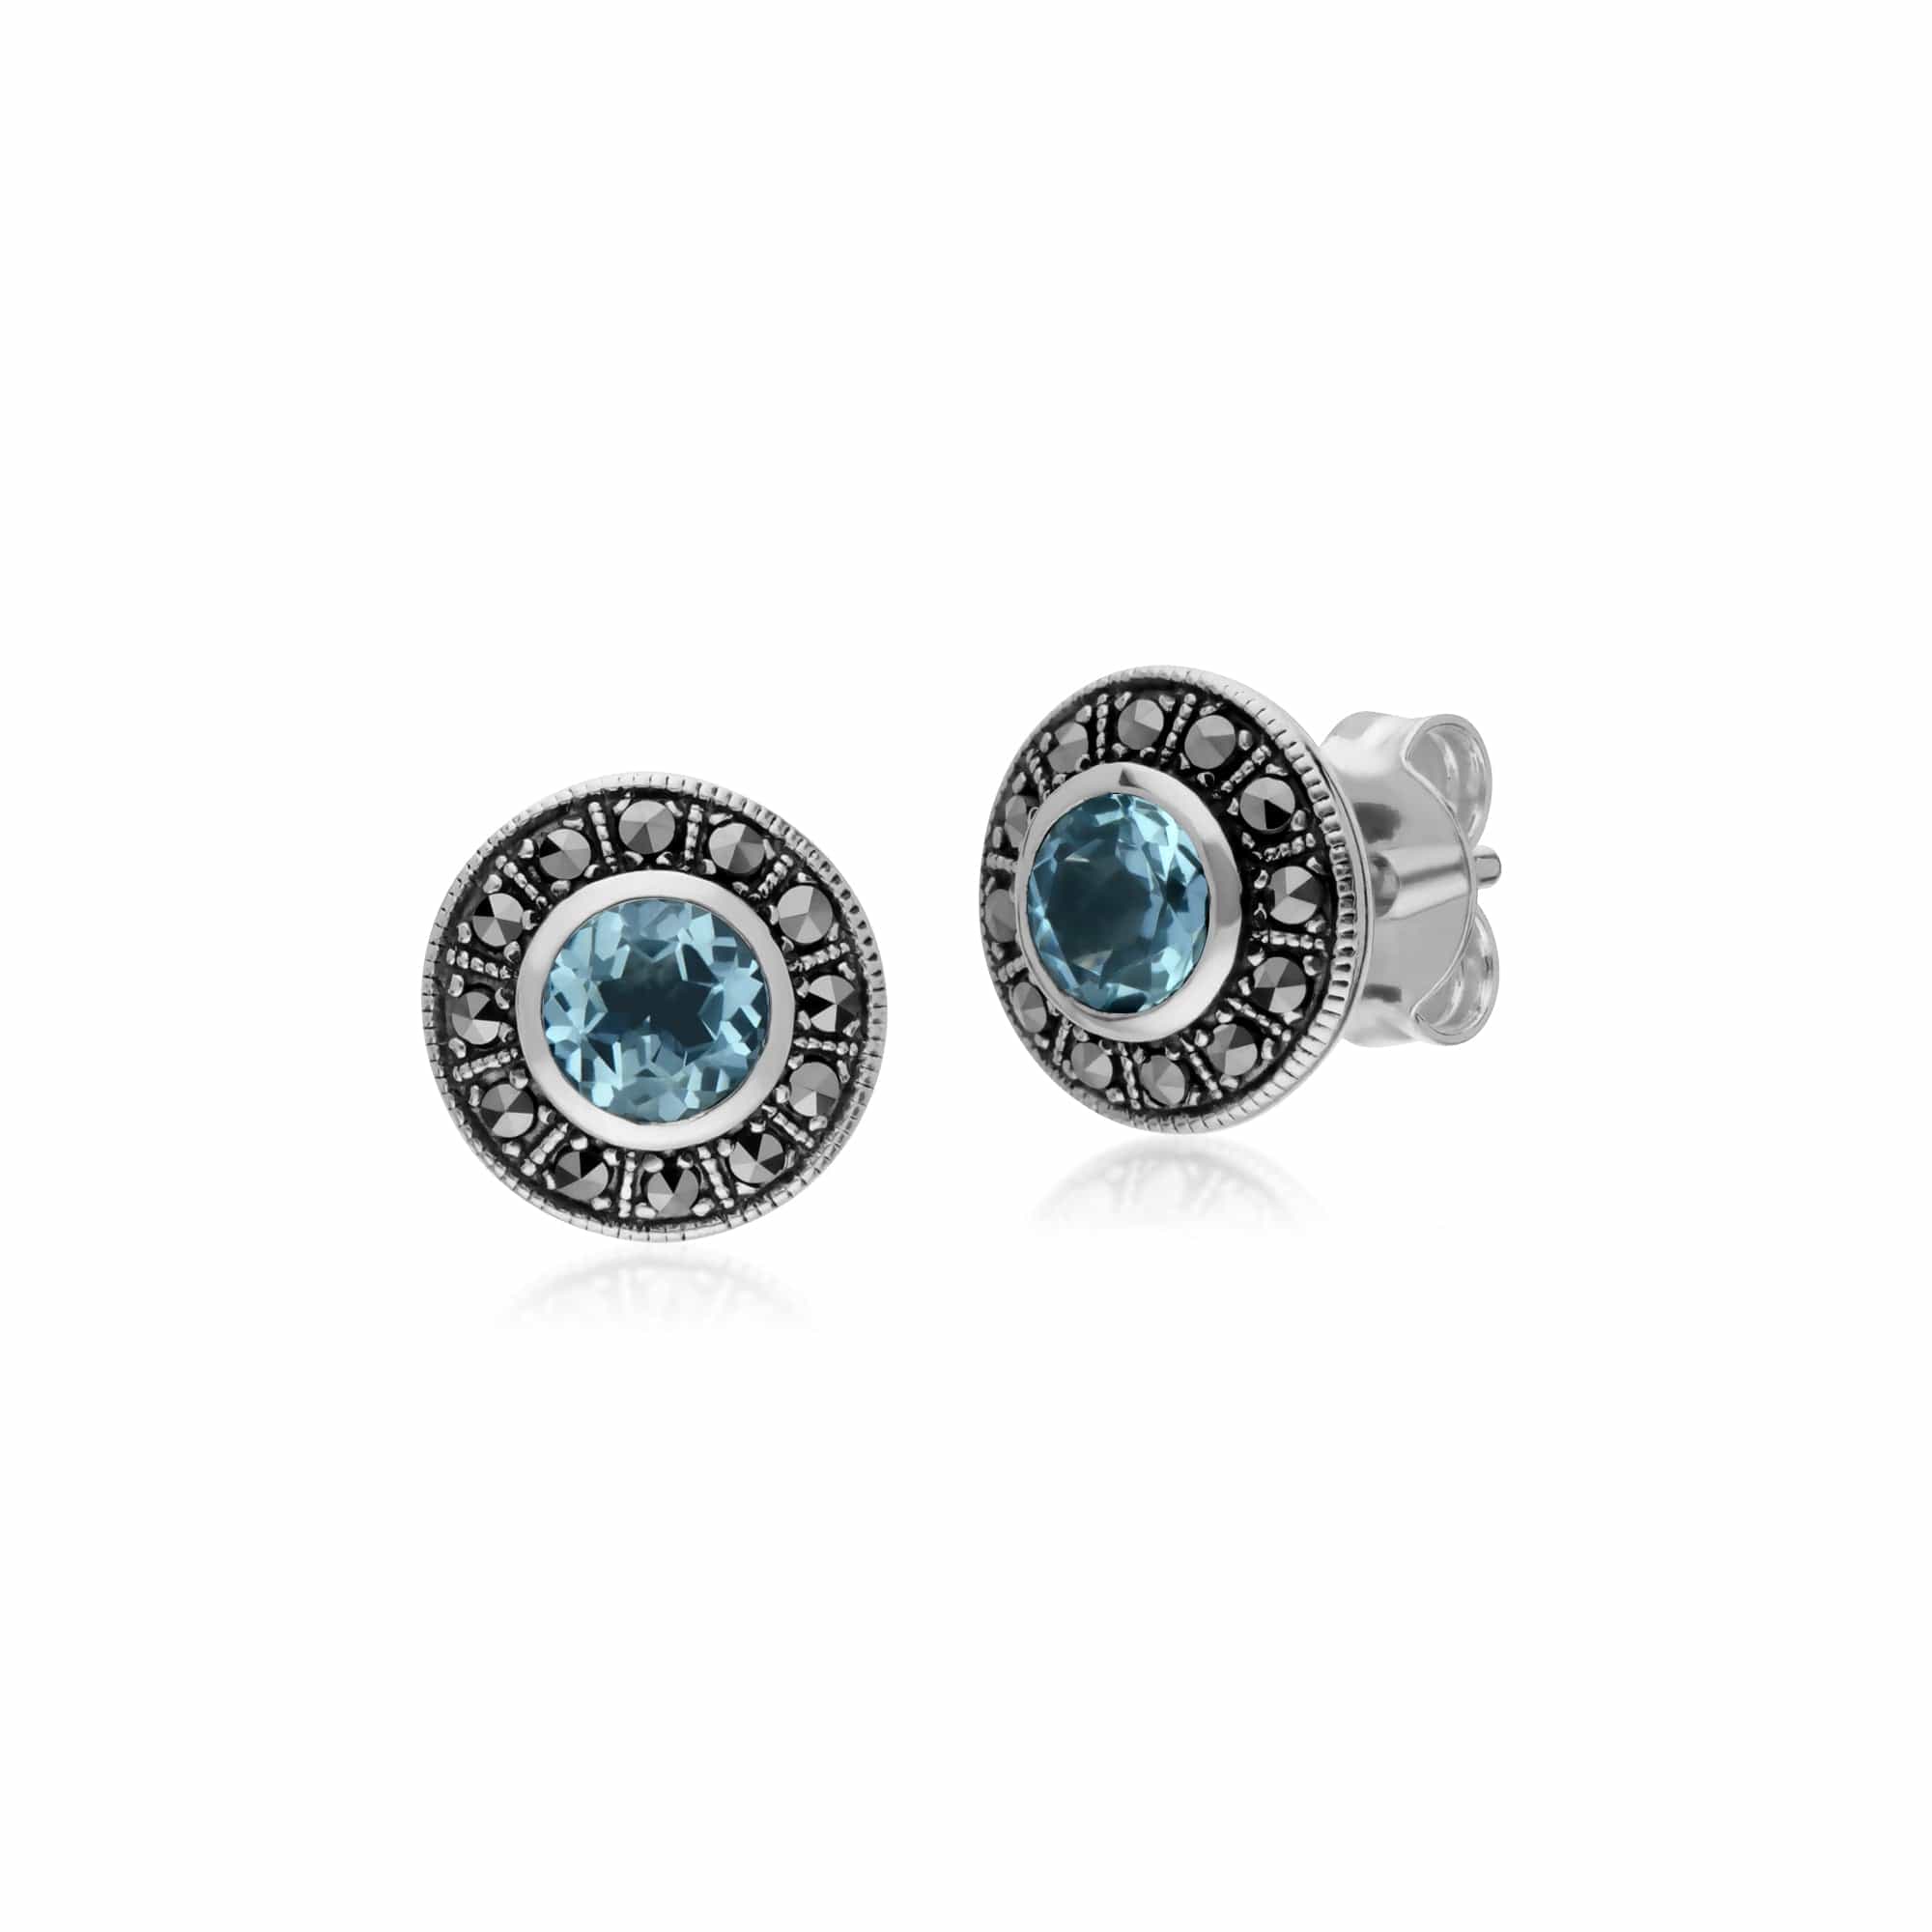 214E872702925-214N707302925 Art Deco Style Round Blue Topaz and Marcasite Cluster Stud Earrings & Pendant Set in 925 Sterling Silver 2